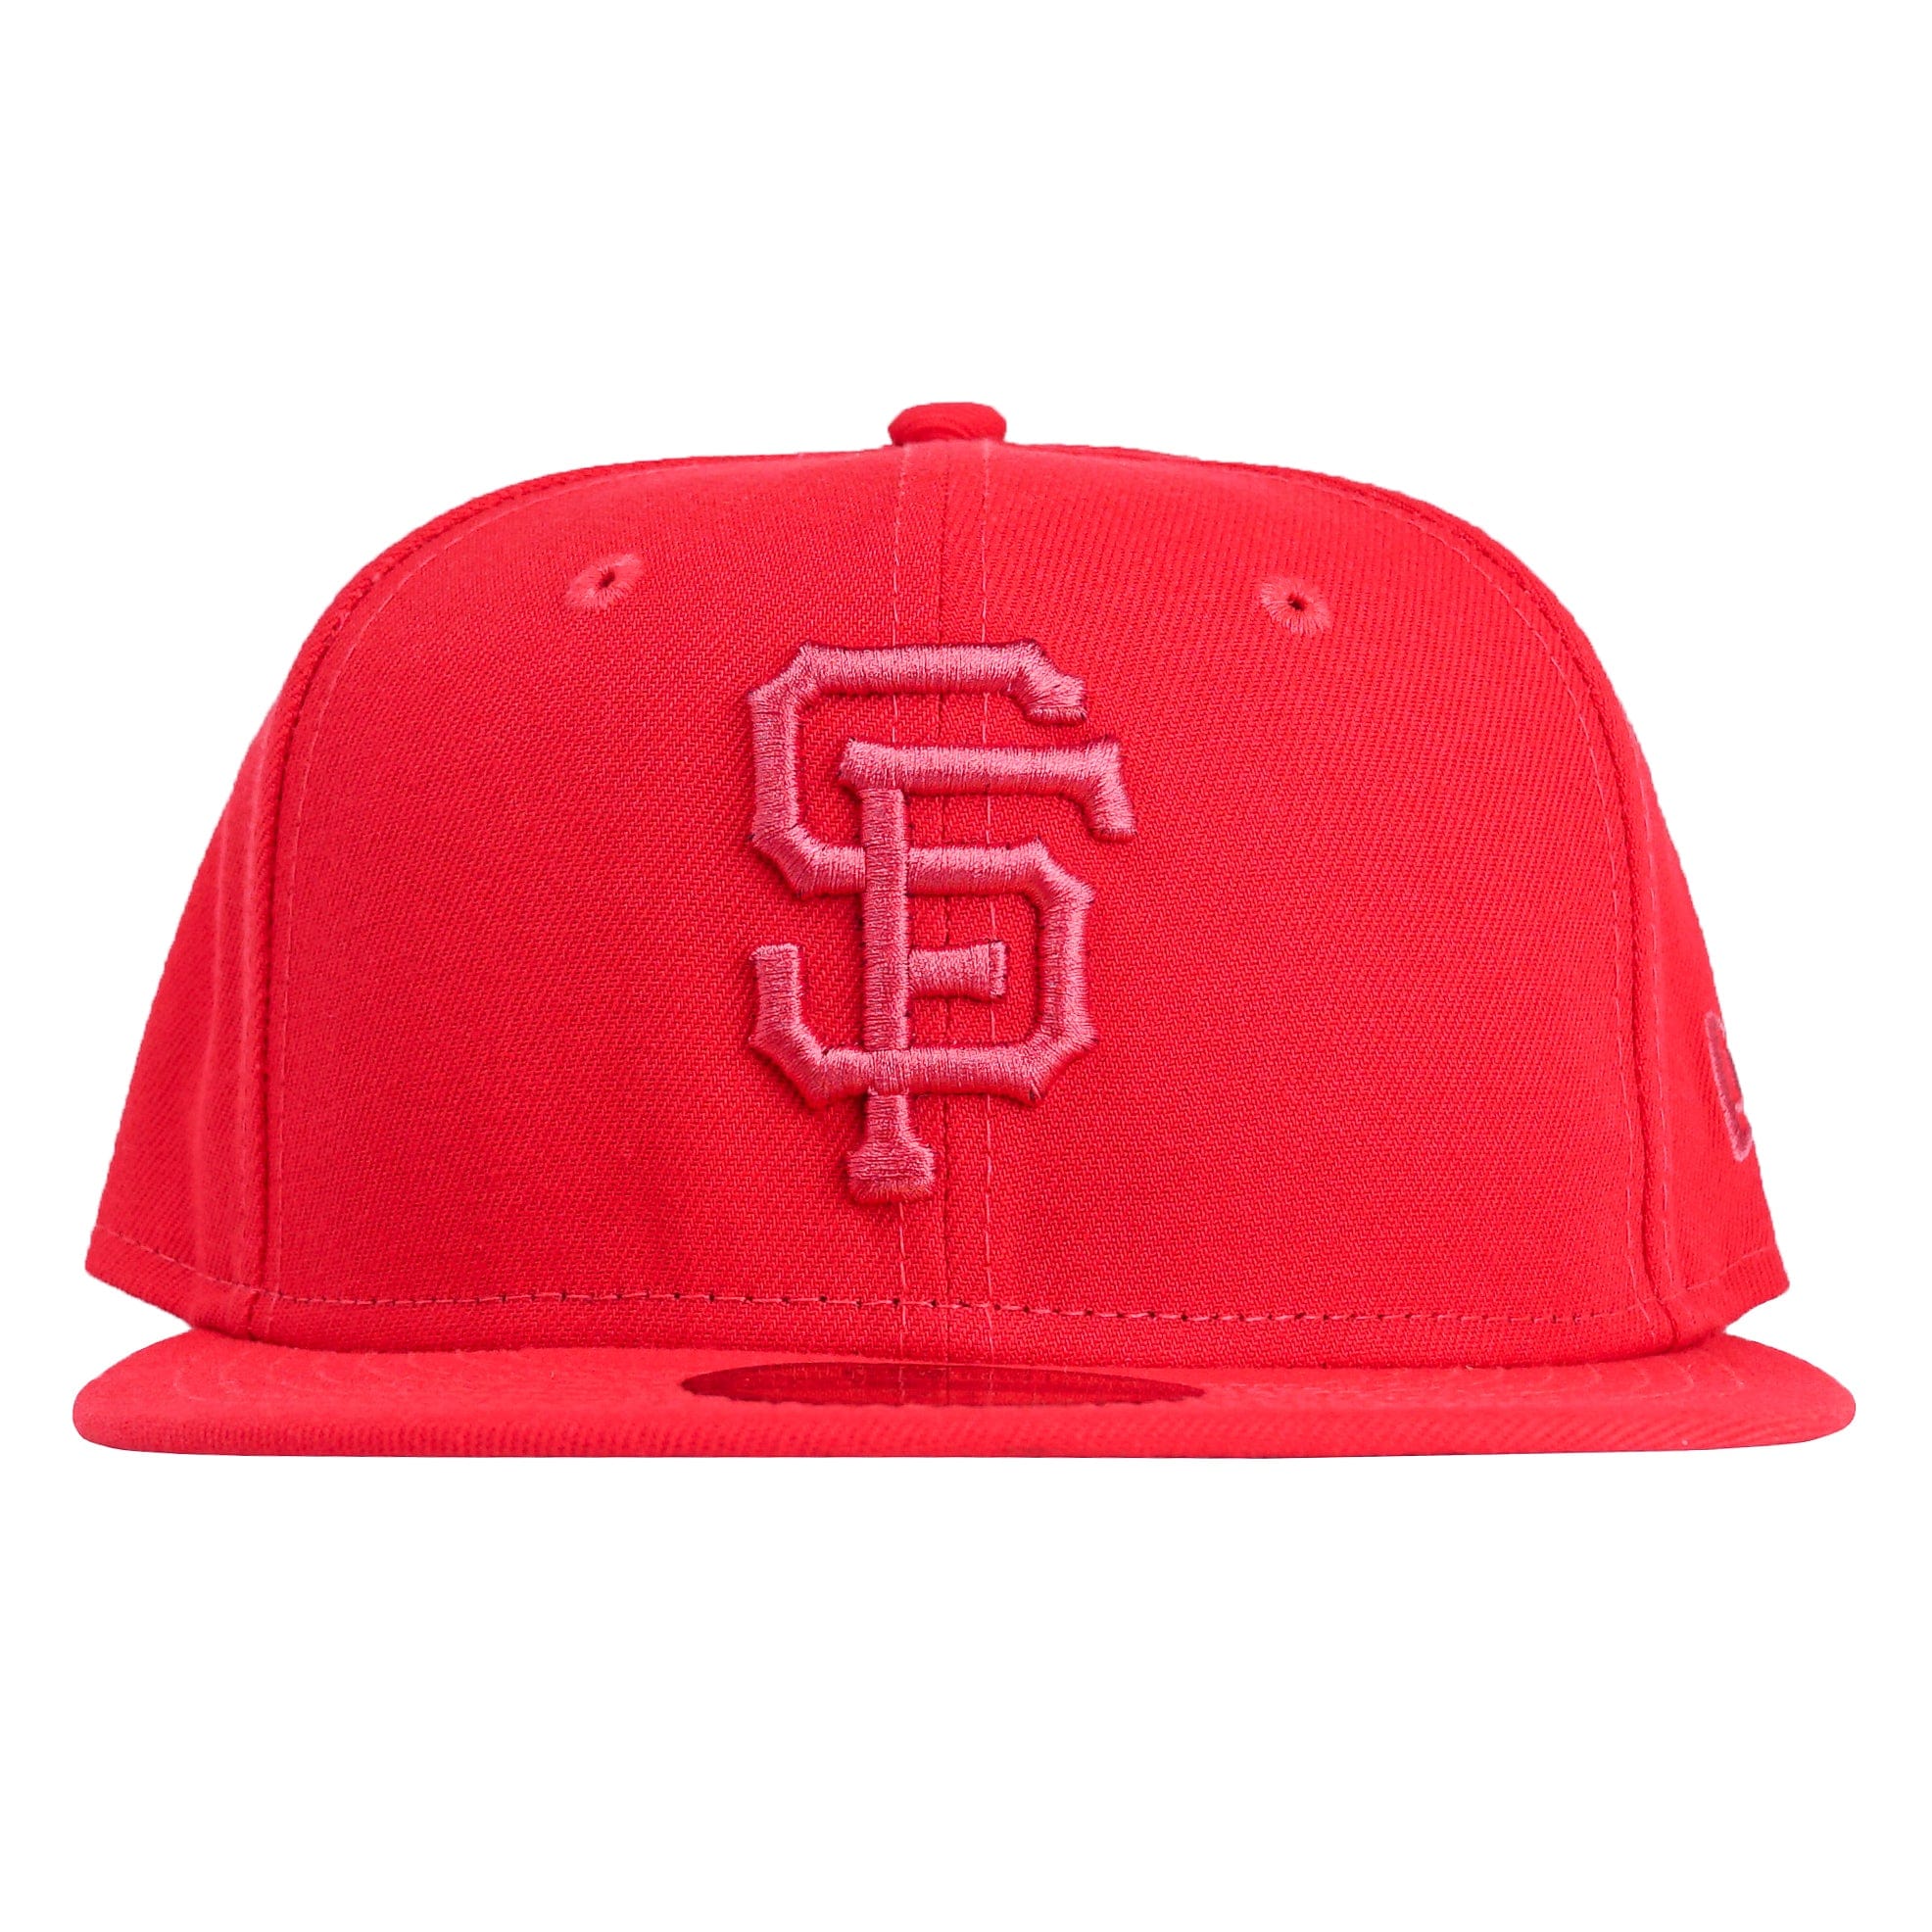 San Francisco Giants Colorpack 59Fifty Fitted Hat in strawberry - New Era - State Of Flux